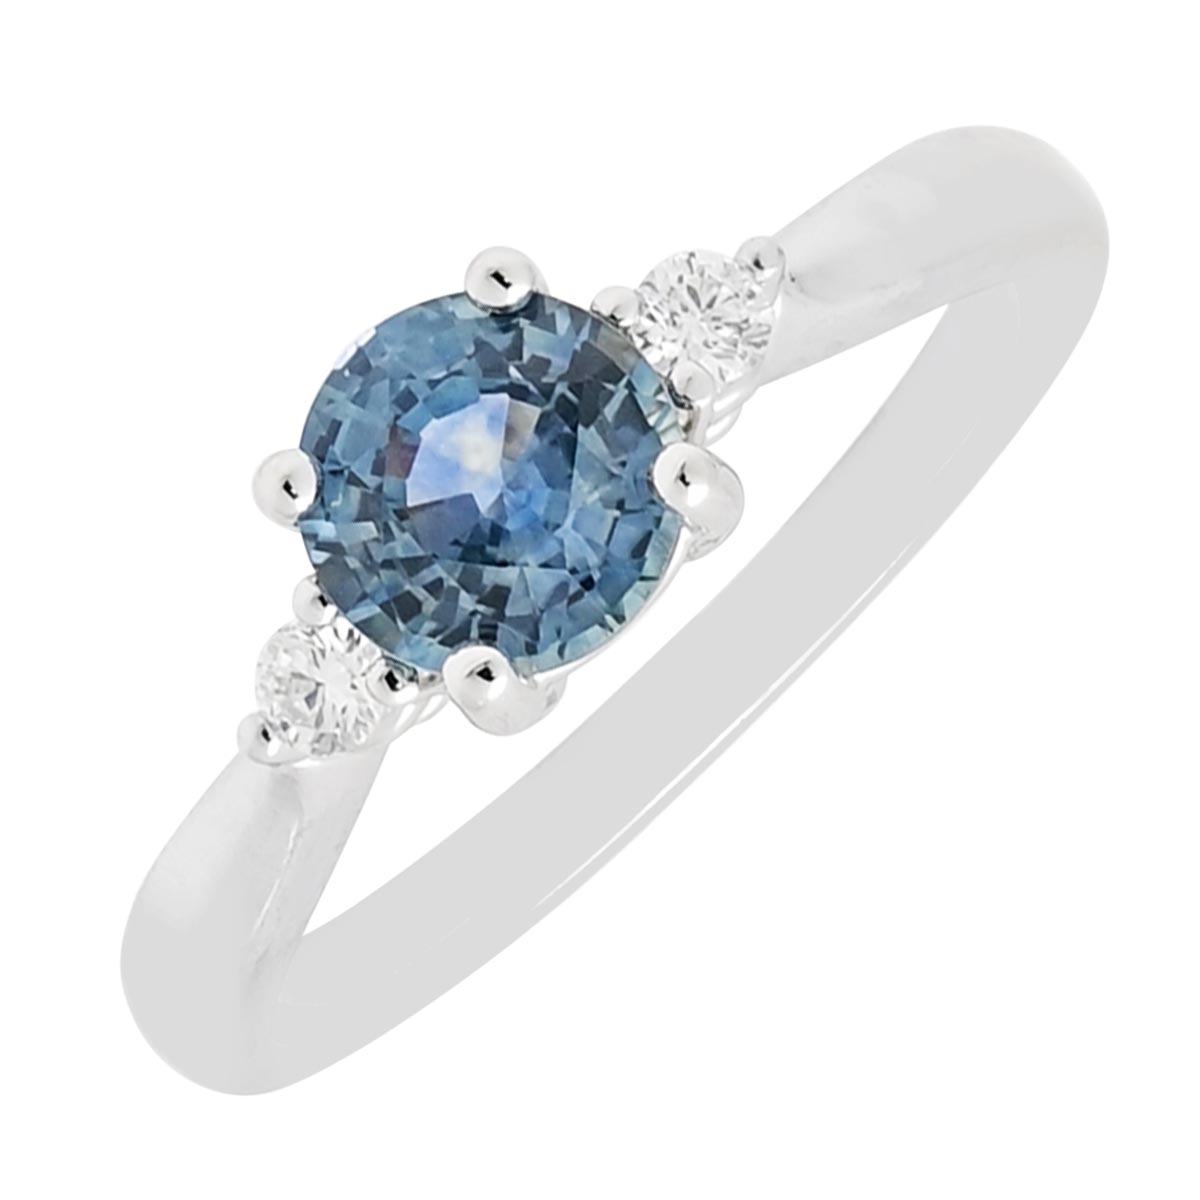 Montana Sapphire Ring in 14kt White Gold with Diamonds (1/10ct tw)